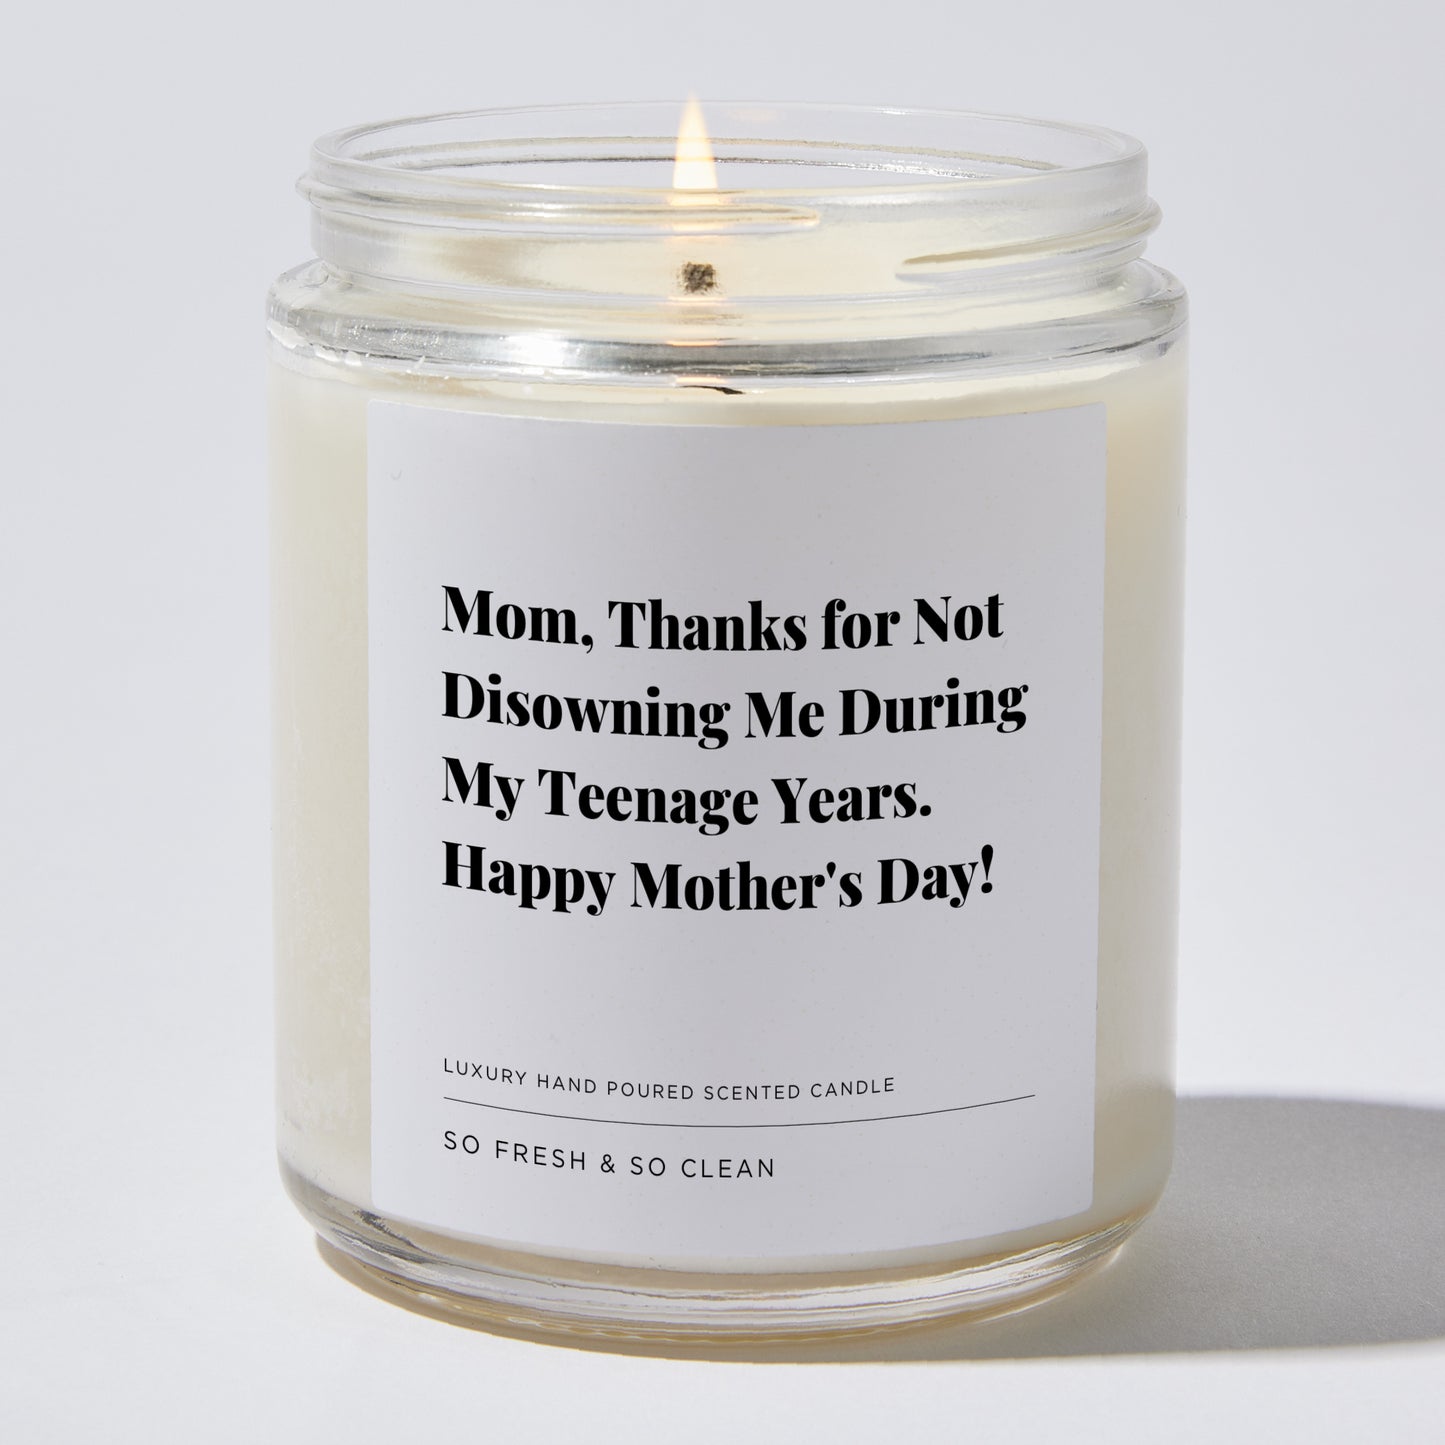 Gift for Mom - Mom, thanks for not disowning me during my teenage years. Happy Mother's Day! - Candle